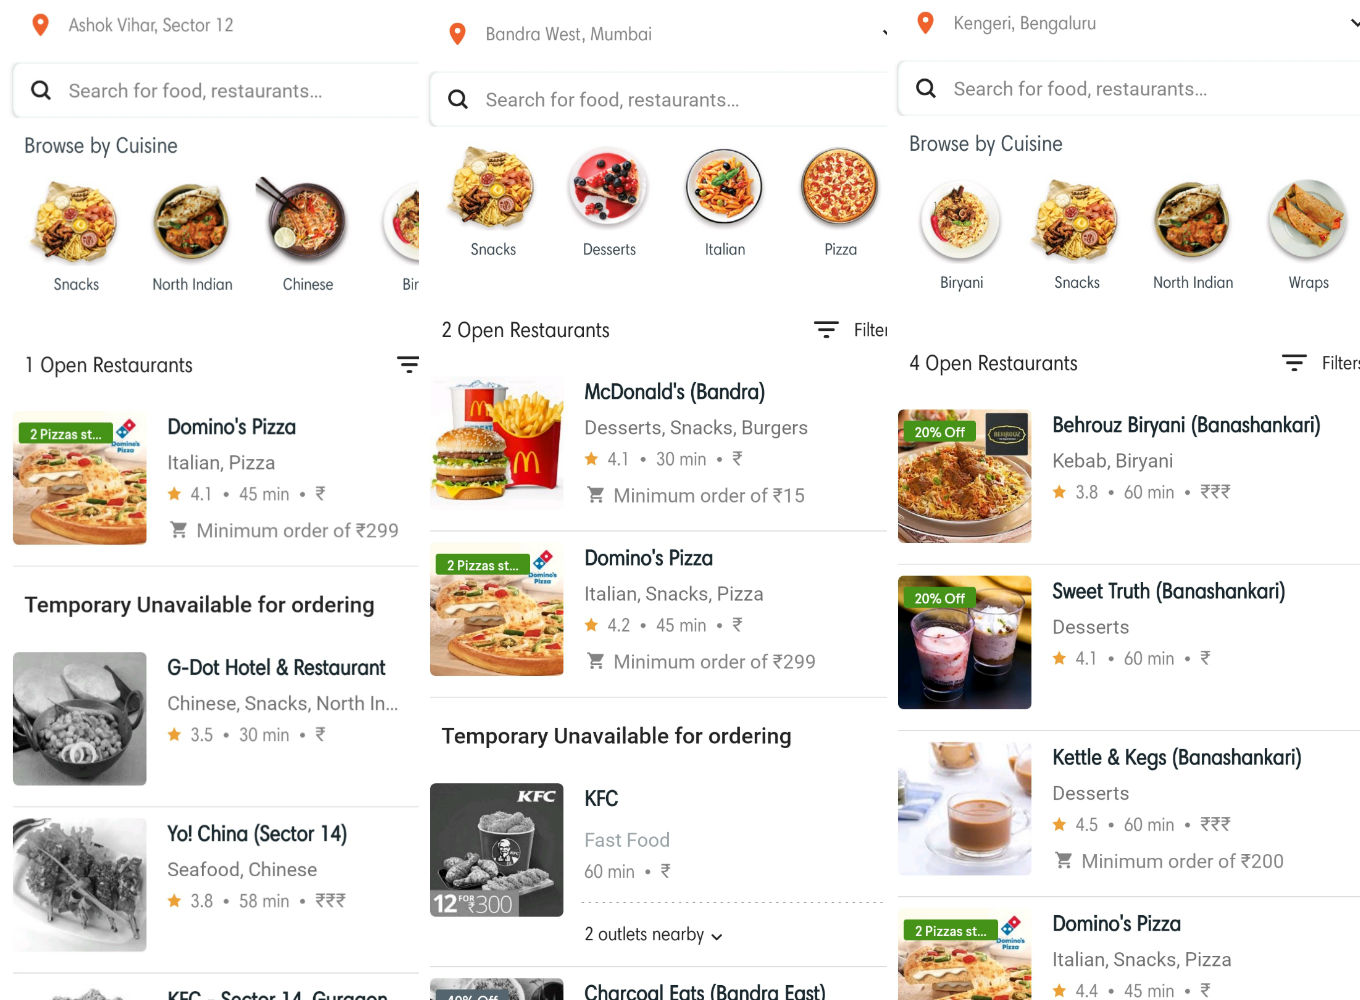 Is Foodpanda Pivoting To Cloud Kitchen Model With Layoffs & Delisted Restaurants?